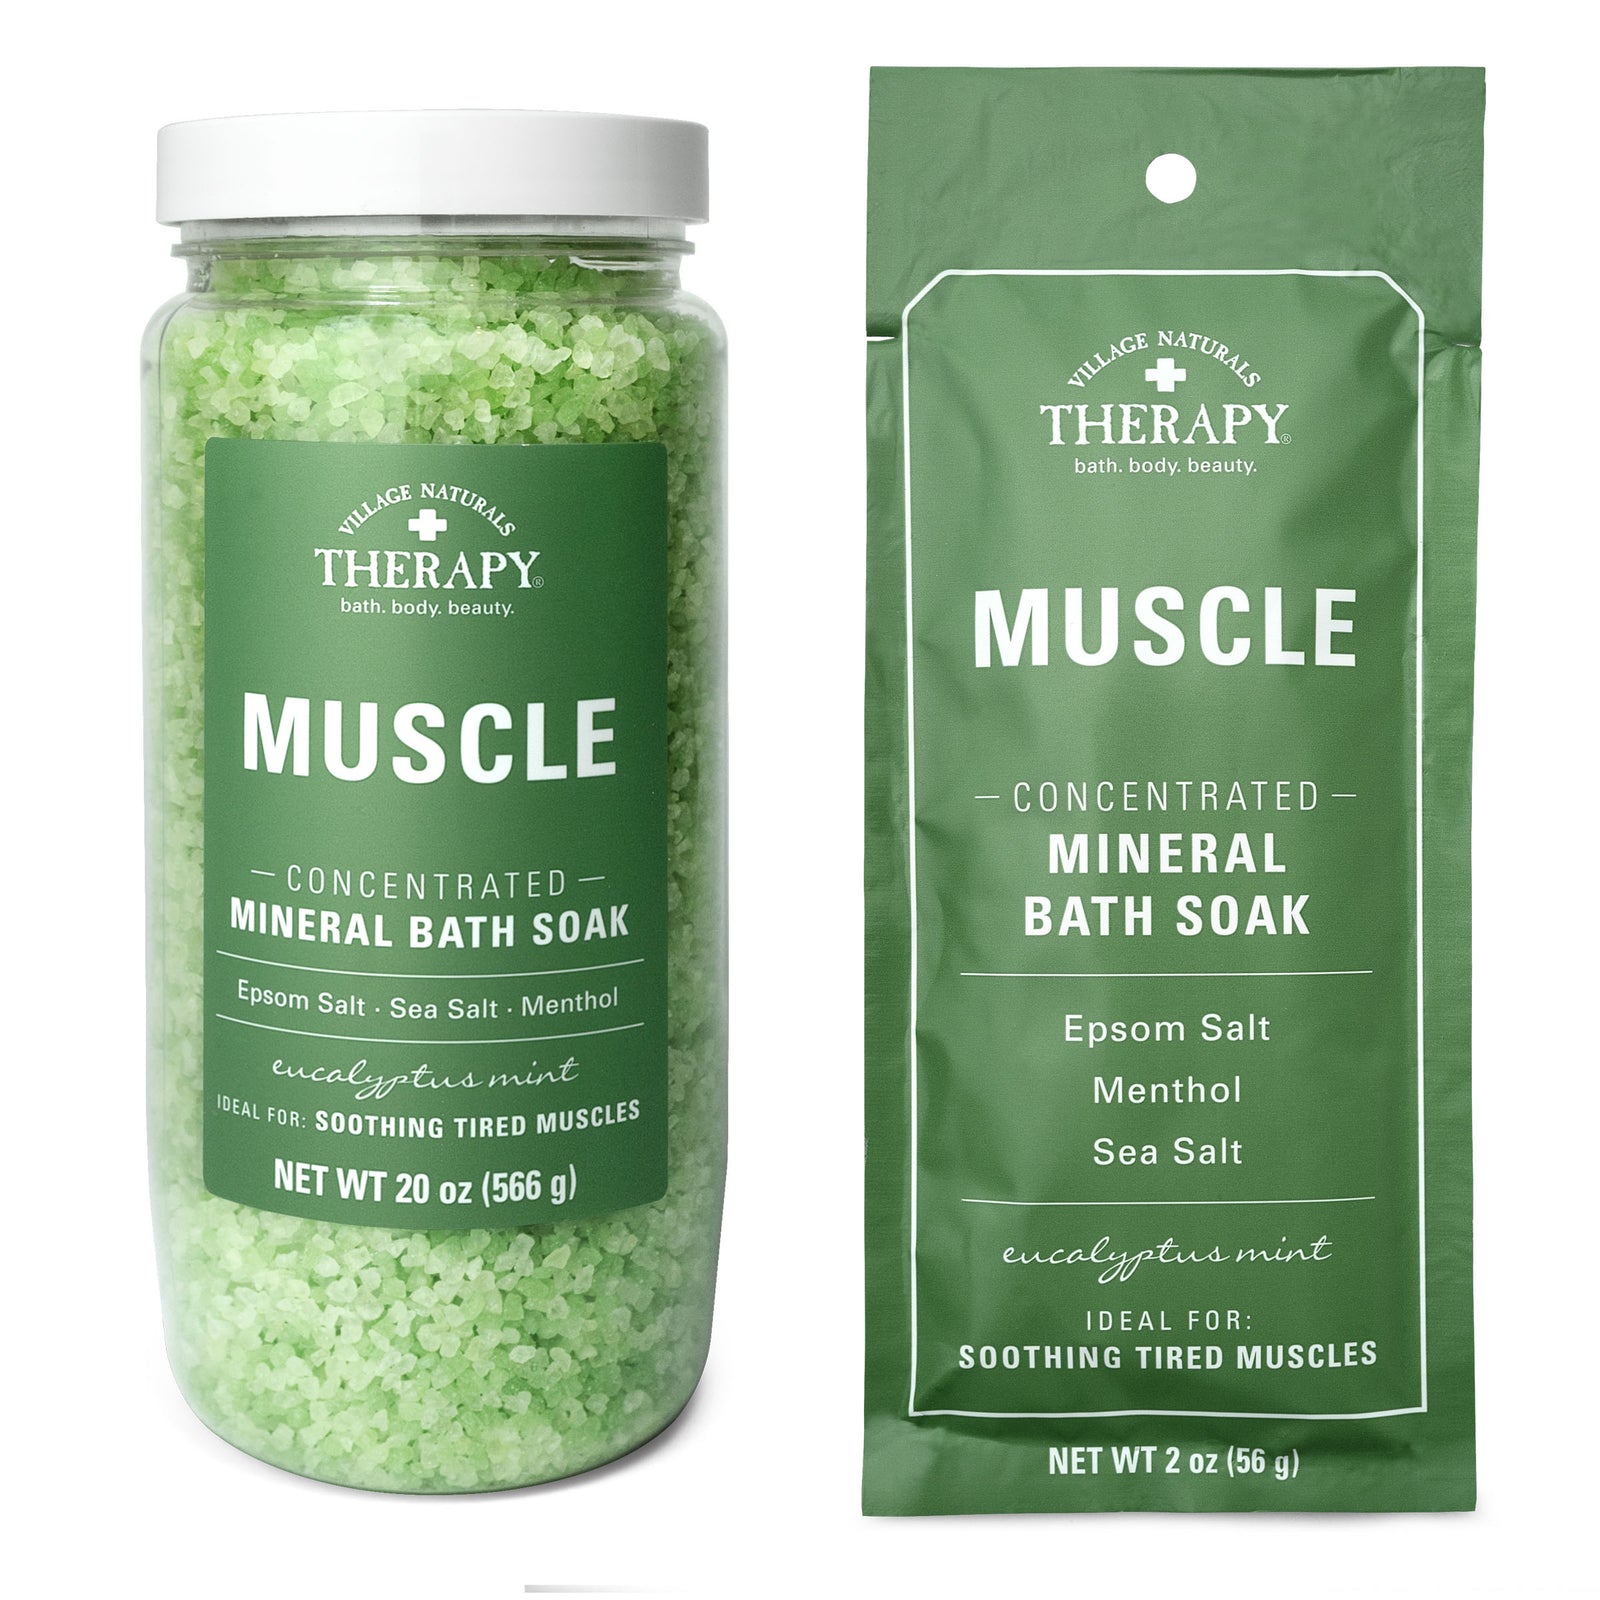 Muscle Concentrated Mineral Bath Soak